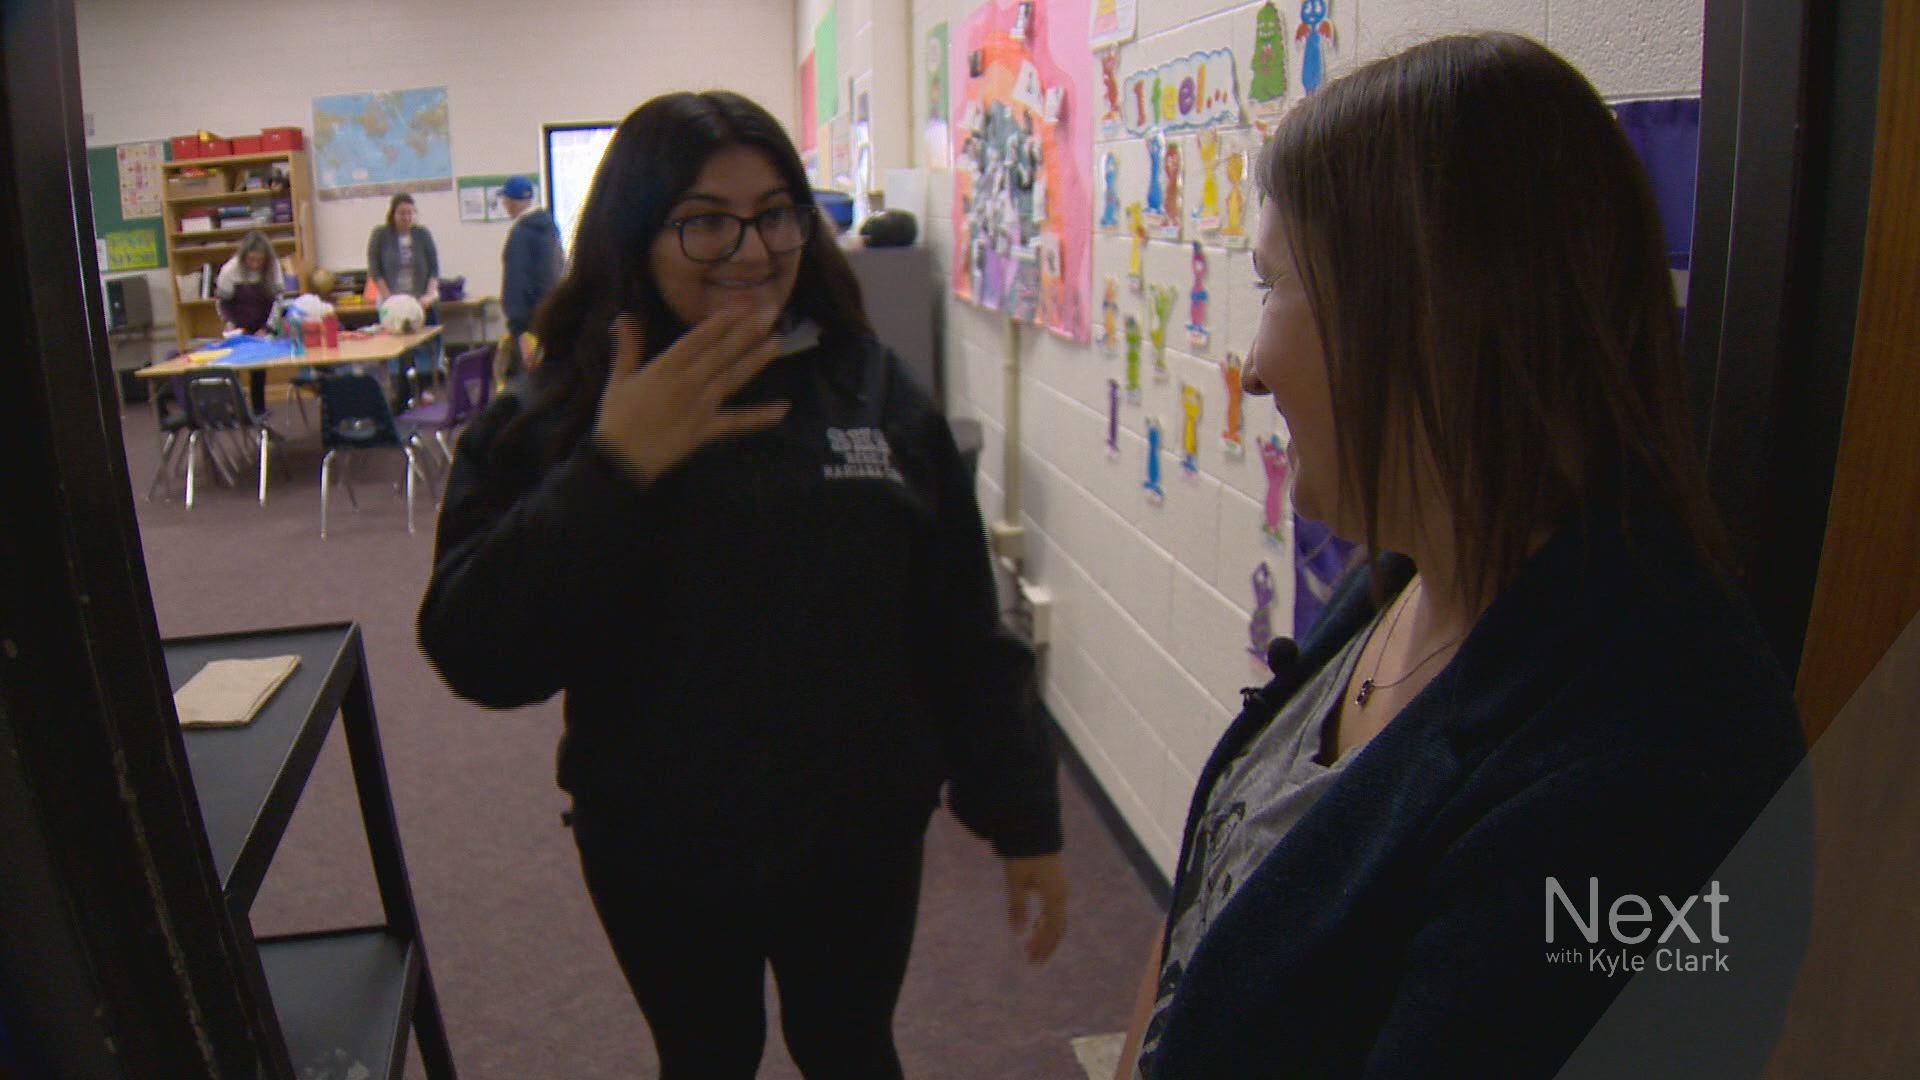 Denver South High School used a lottery system to give students the chance to win one of 51 tickets for themselves and their parents.